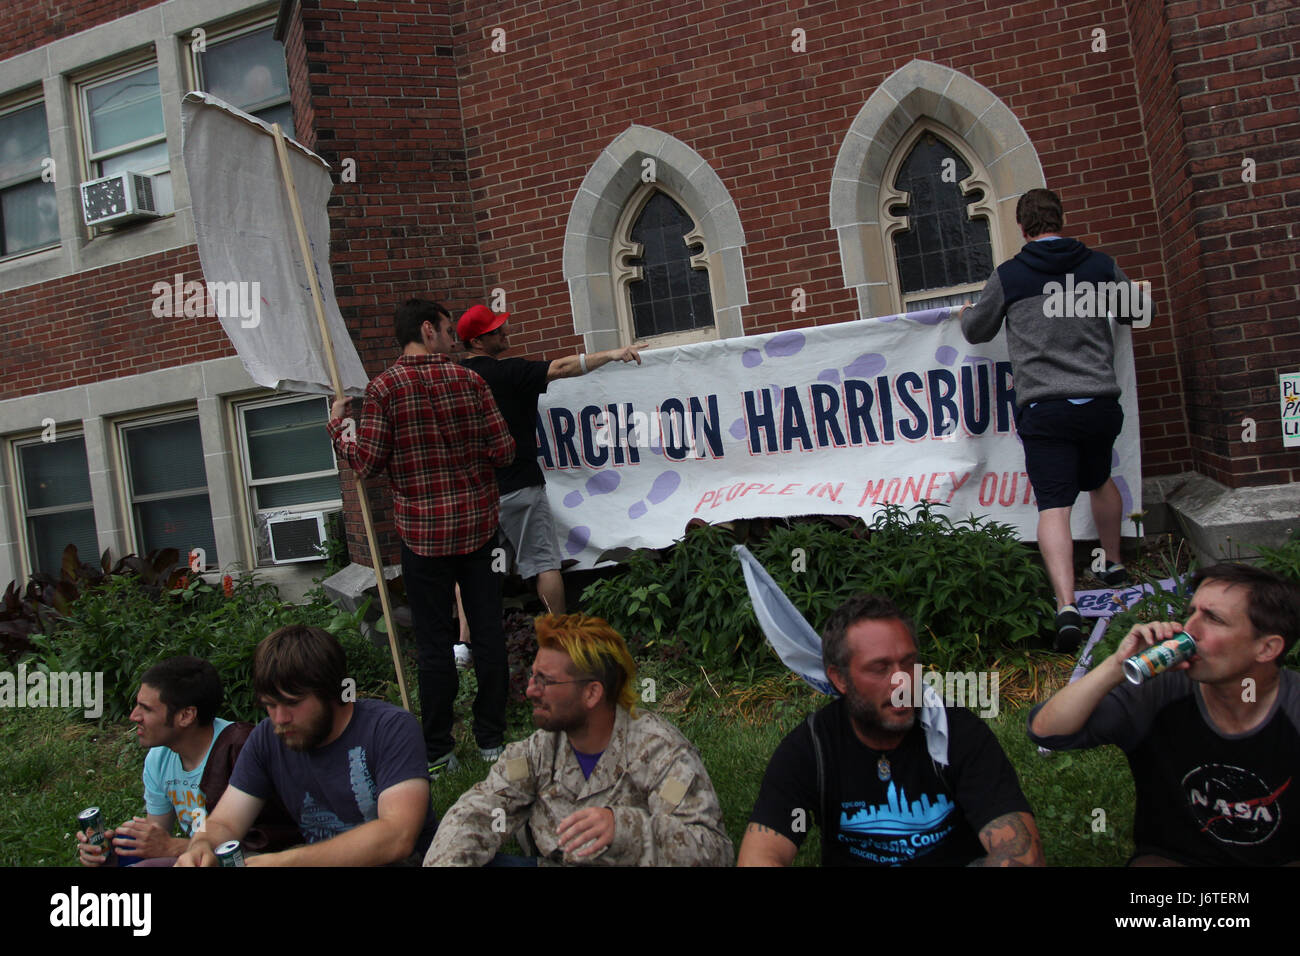 Harrisburg, PA., 21st May, 2017. A group of demonstrators, some of whom marched more than 100 miles from Philadelphia over the course of nine days, celebrate after arriving at the Unitarian Church of Harrisburg in Harrisburg, PA, Sunday, May 21, 2017. The organizers plan on staging actions at the State Capitol building starting Monday, including planned civil disobedience. Credit: Michael Candelori/Alamy Live News Stock Photo